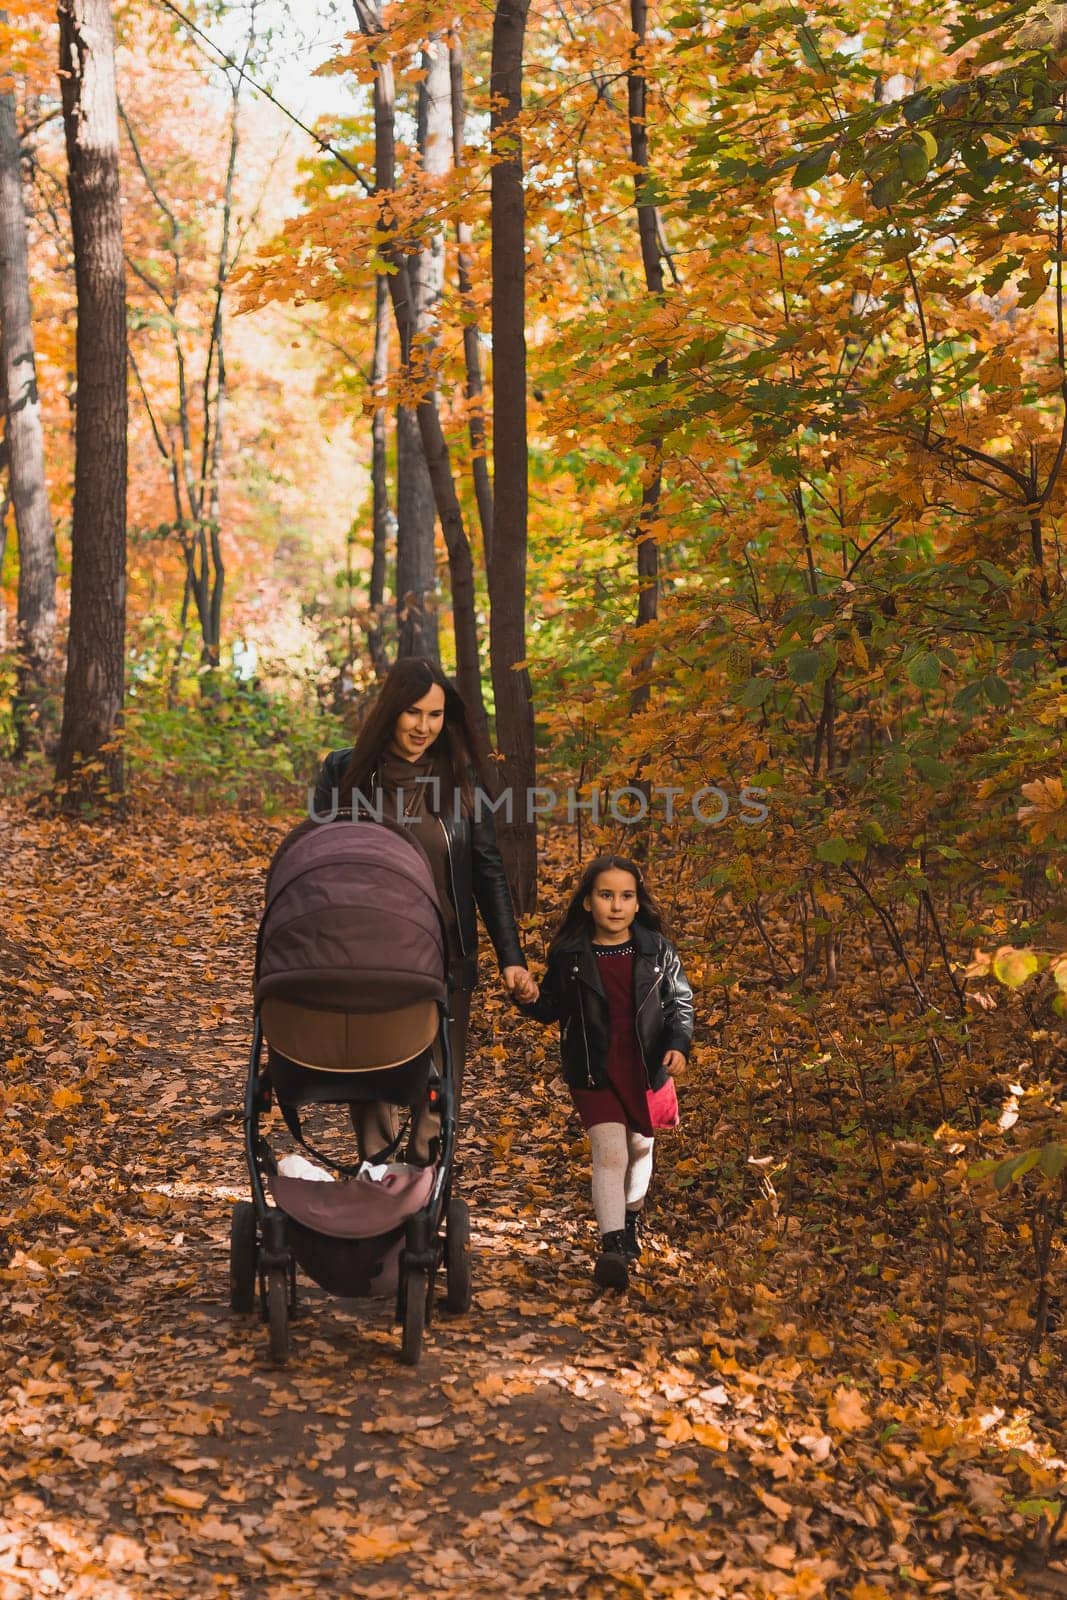 Mother and her little daughter and a baby in pram on walk in autumn wood by Satura86